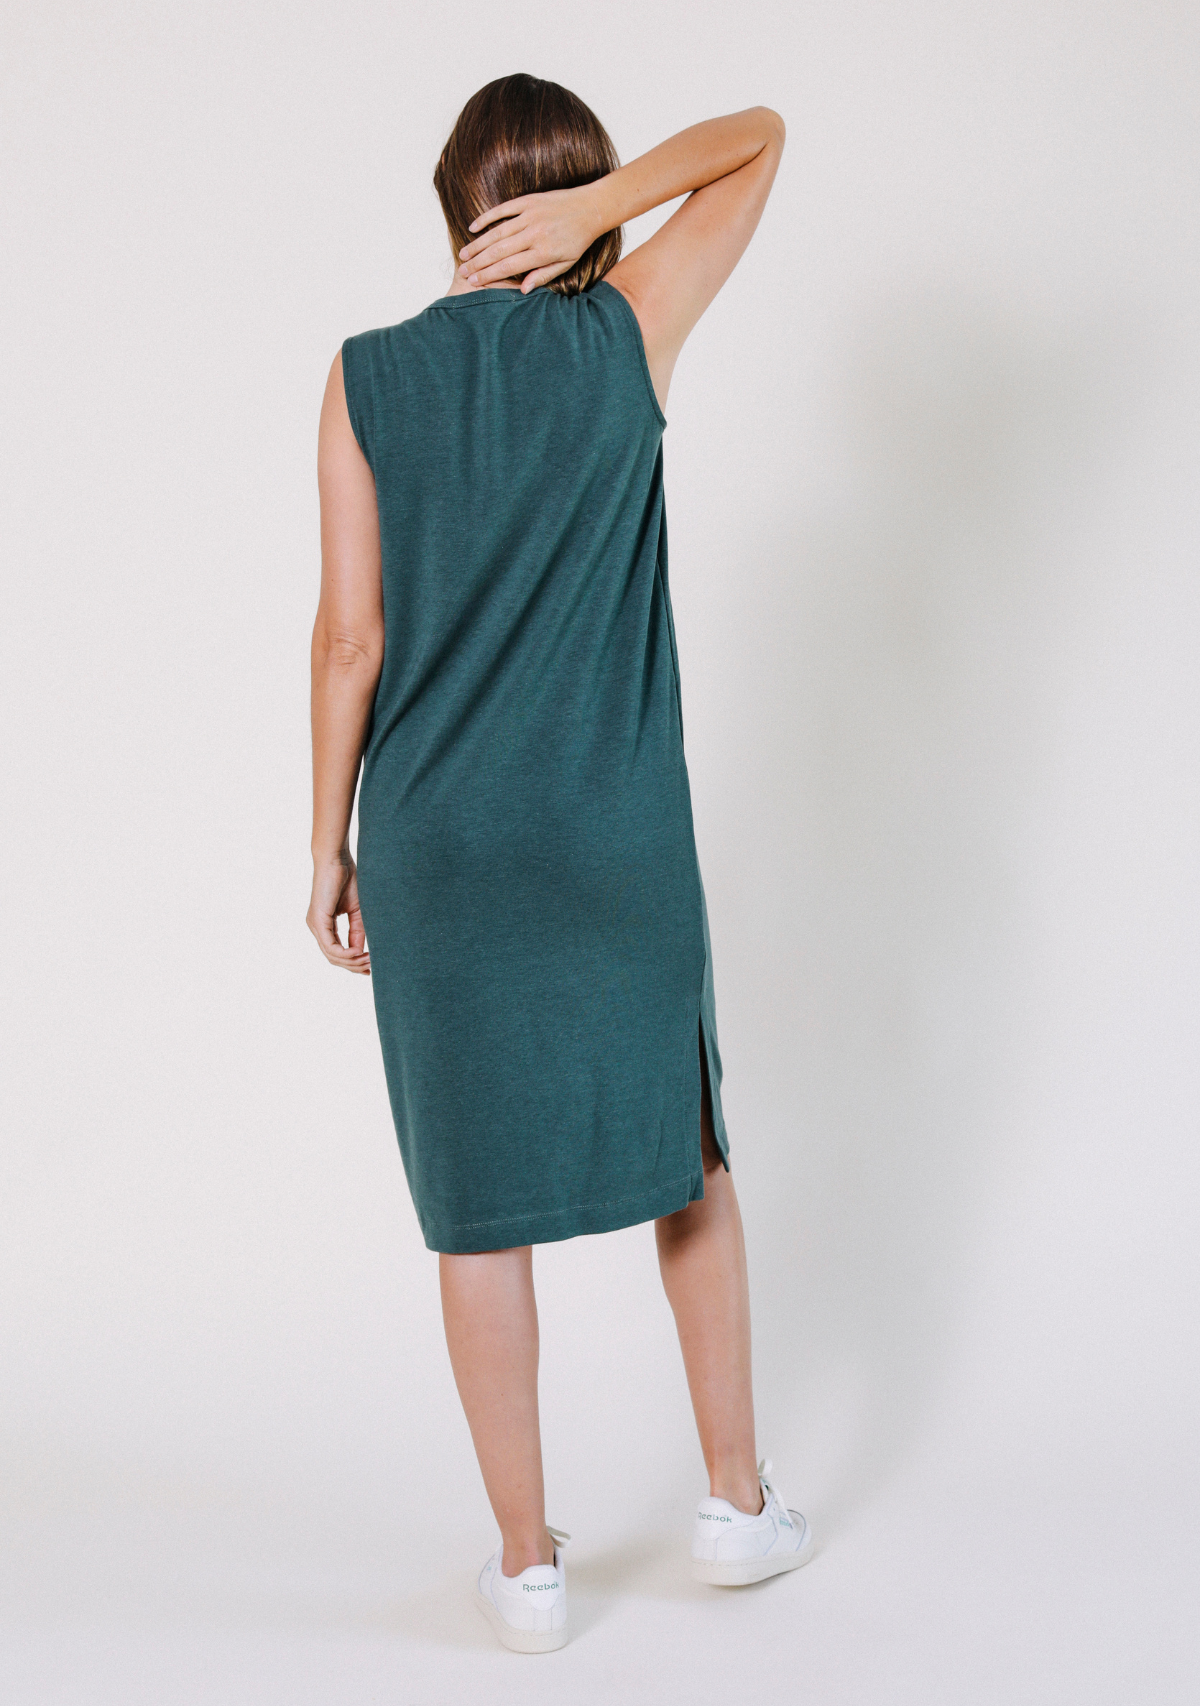 Tank Dress made from TENCEL™ and Organic Cotton Jersey sizes XS-3X color pine green